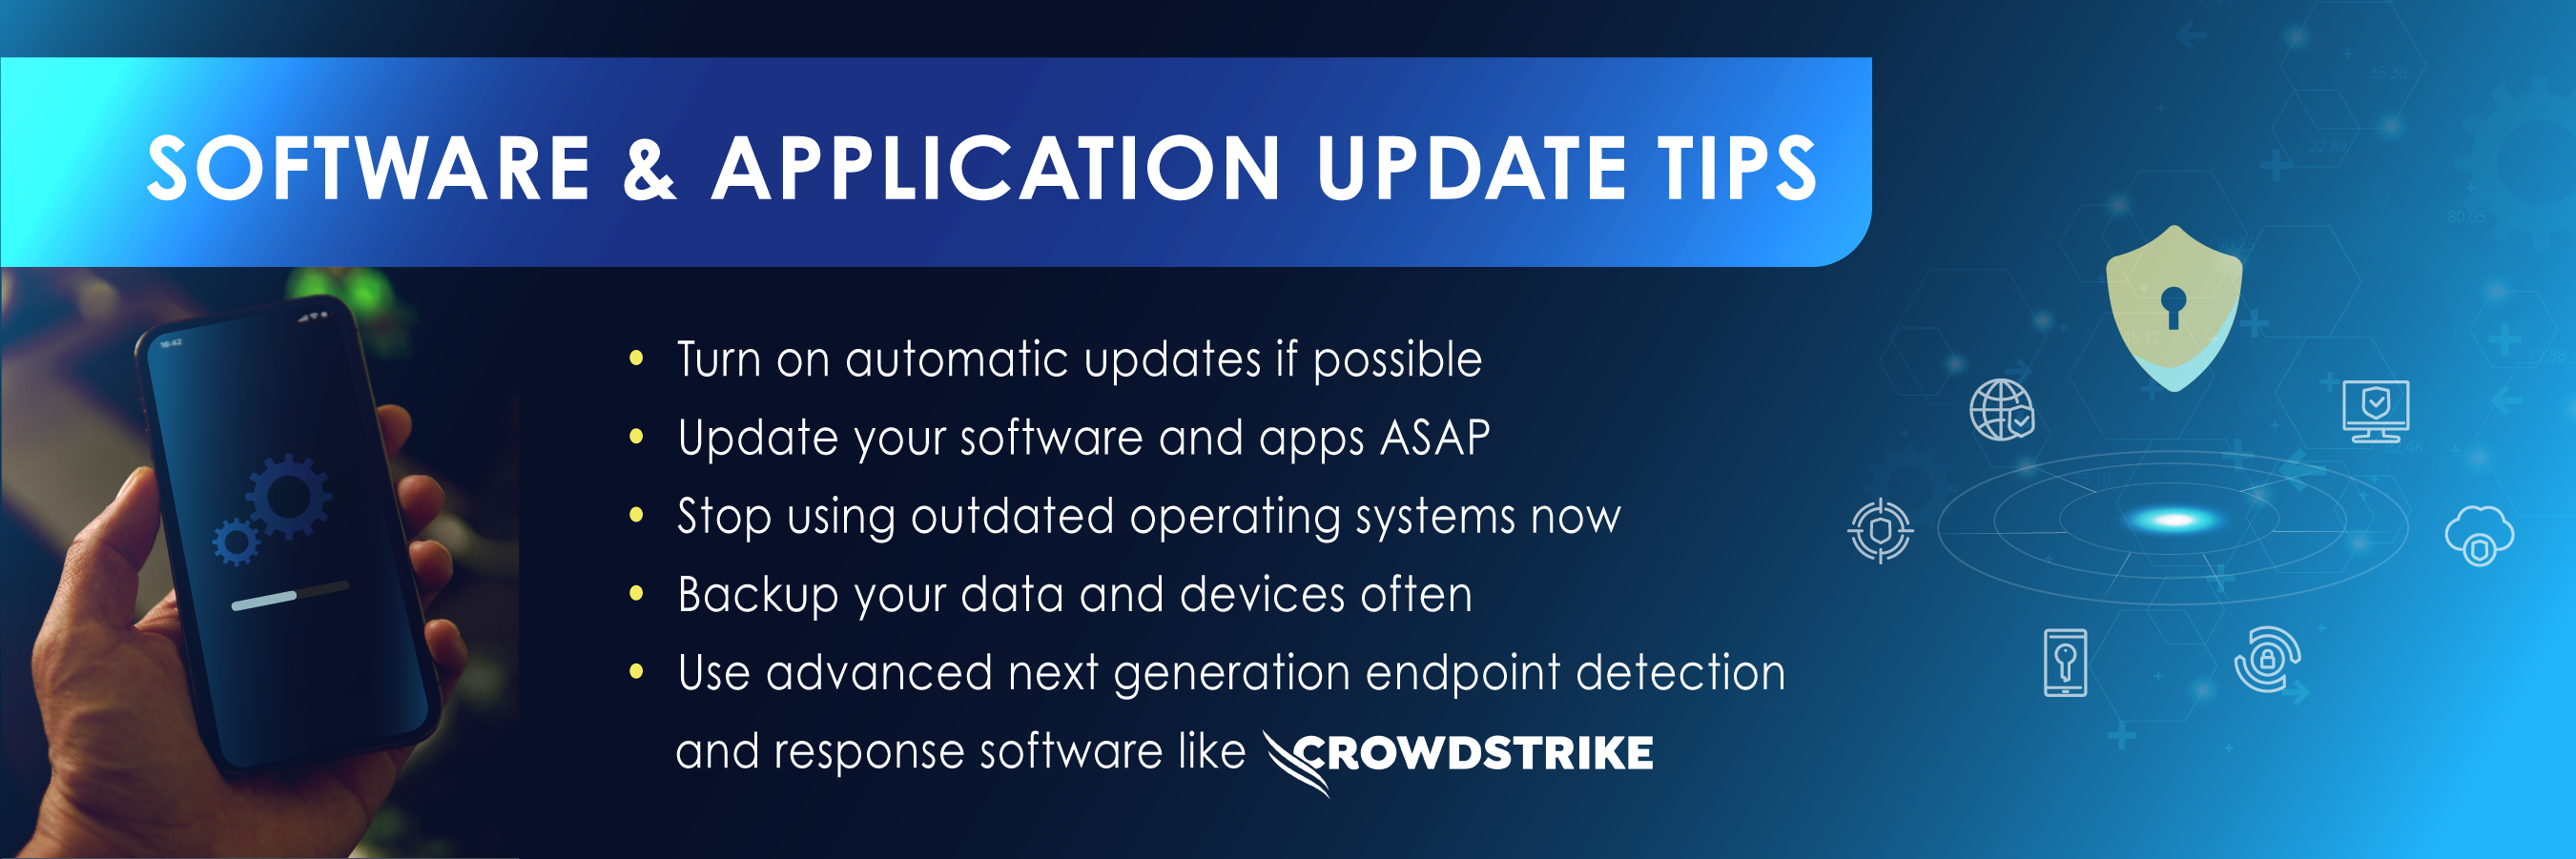 Tips for updating software